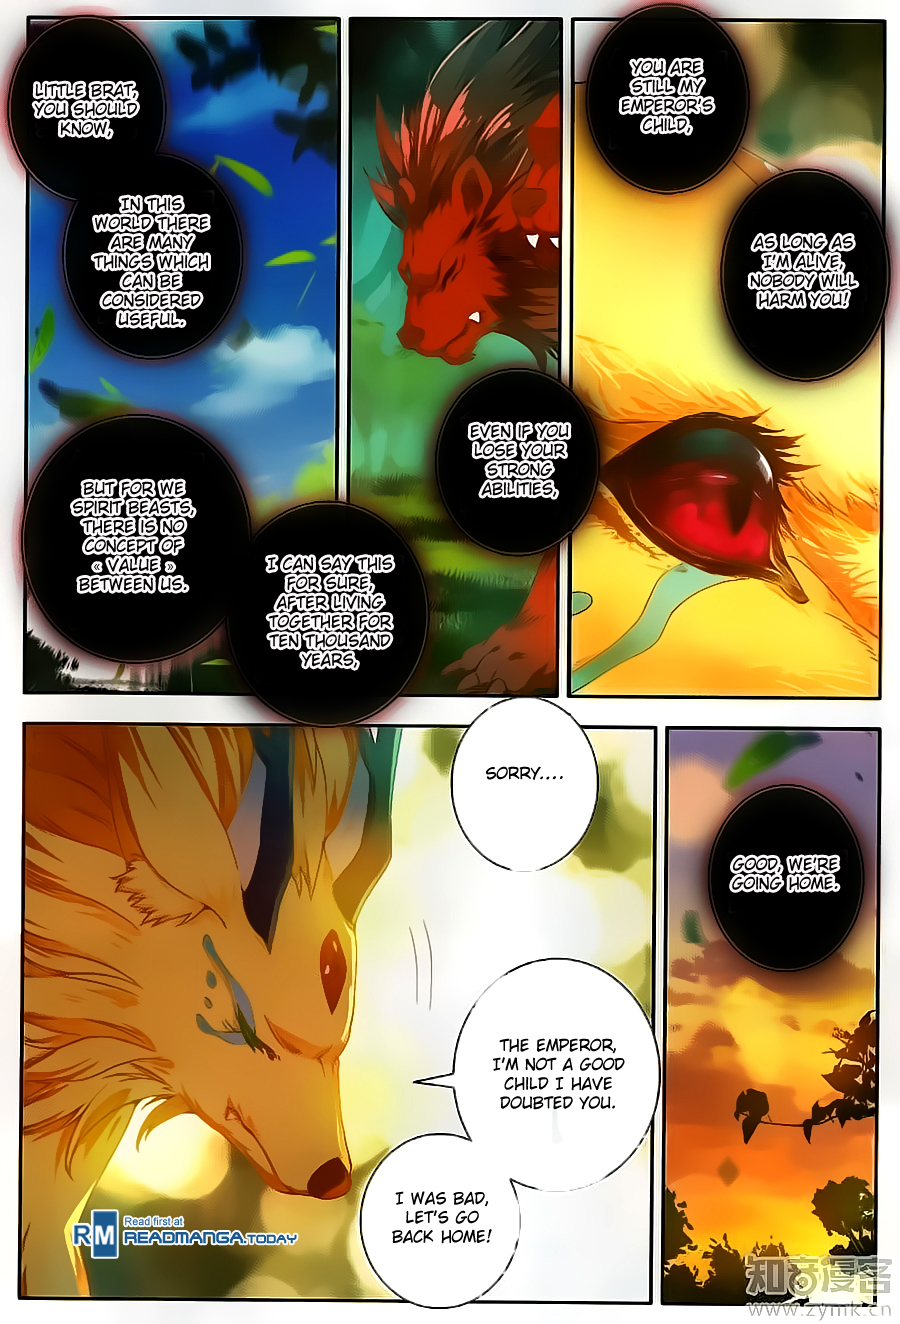 Soul Land II The Peerless Tang Sect Ch. 113 The Eye of Destiny